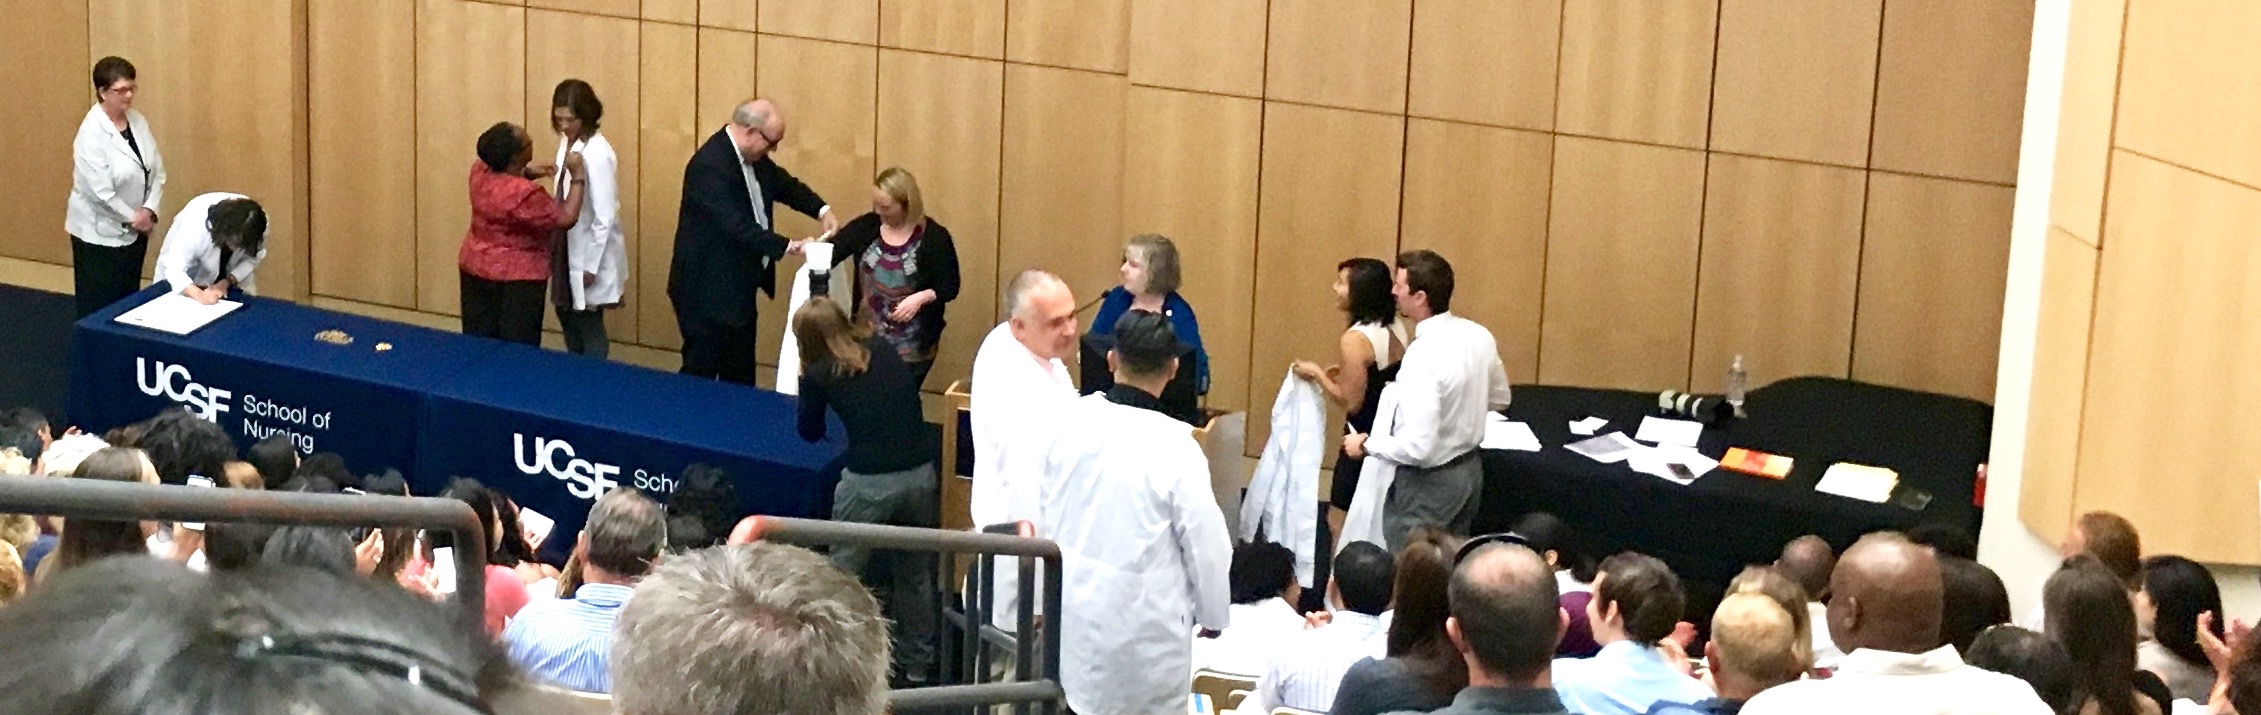 2016 MEPN students approach the podium and stage to receive their white coats and pins.